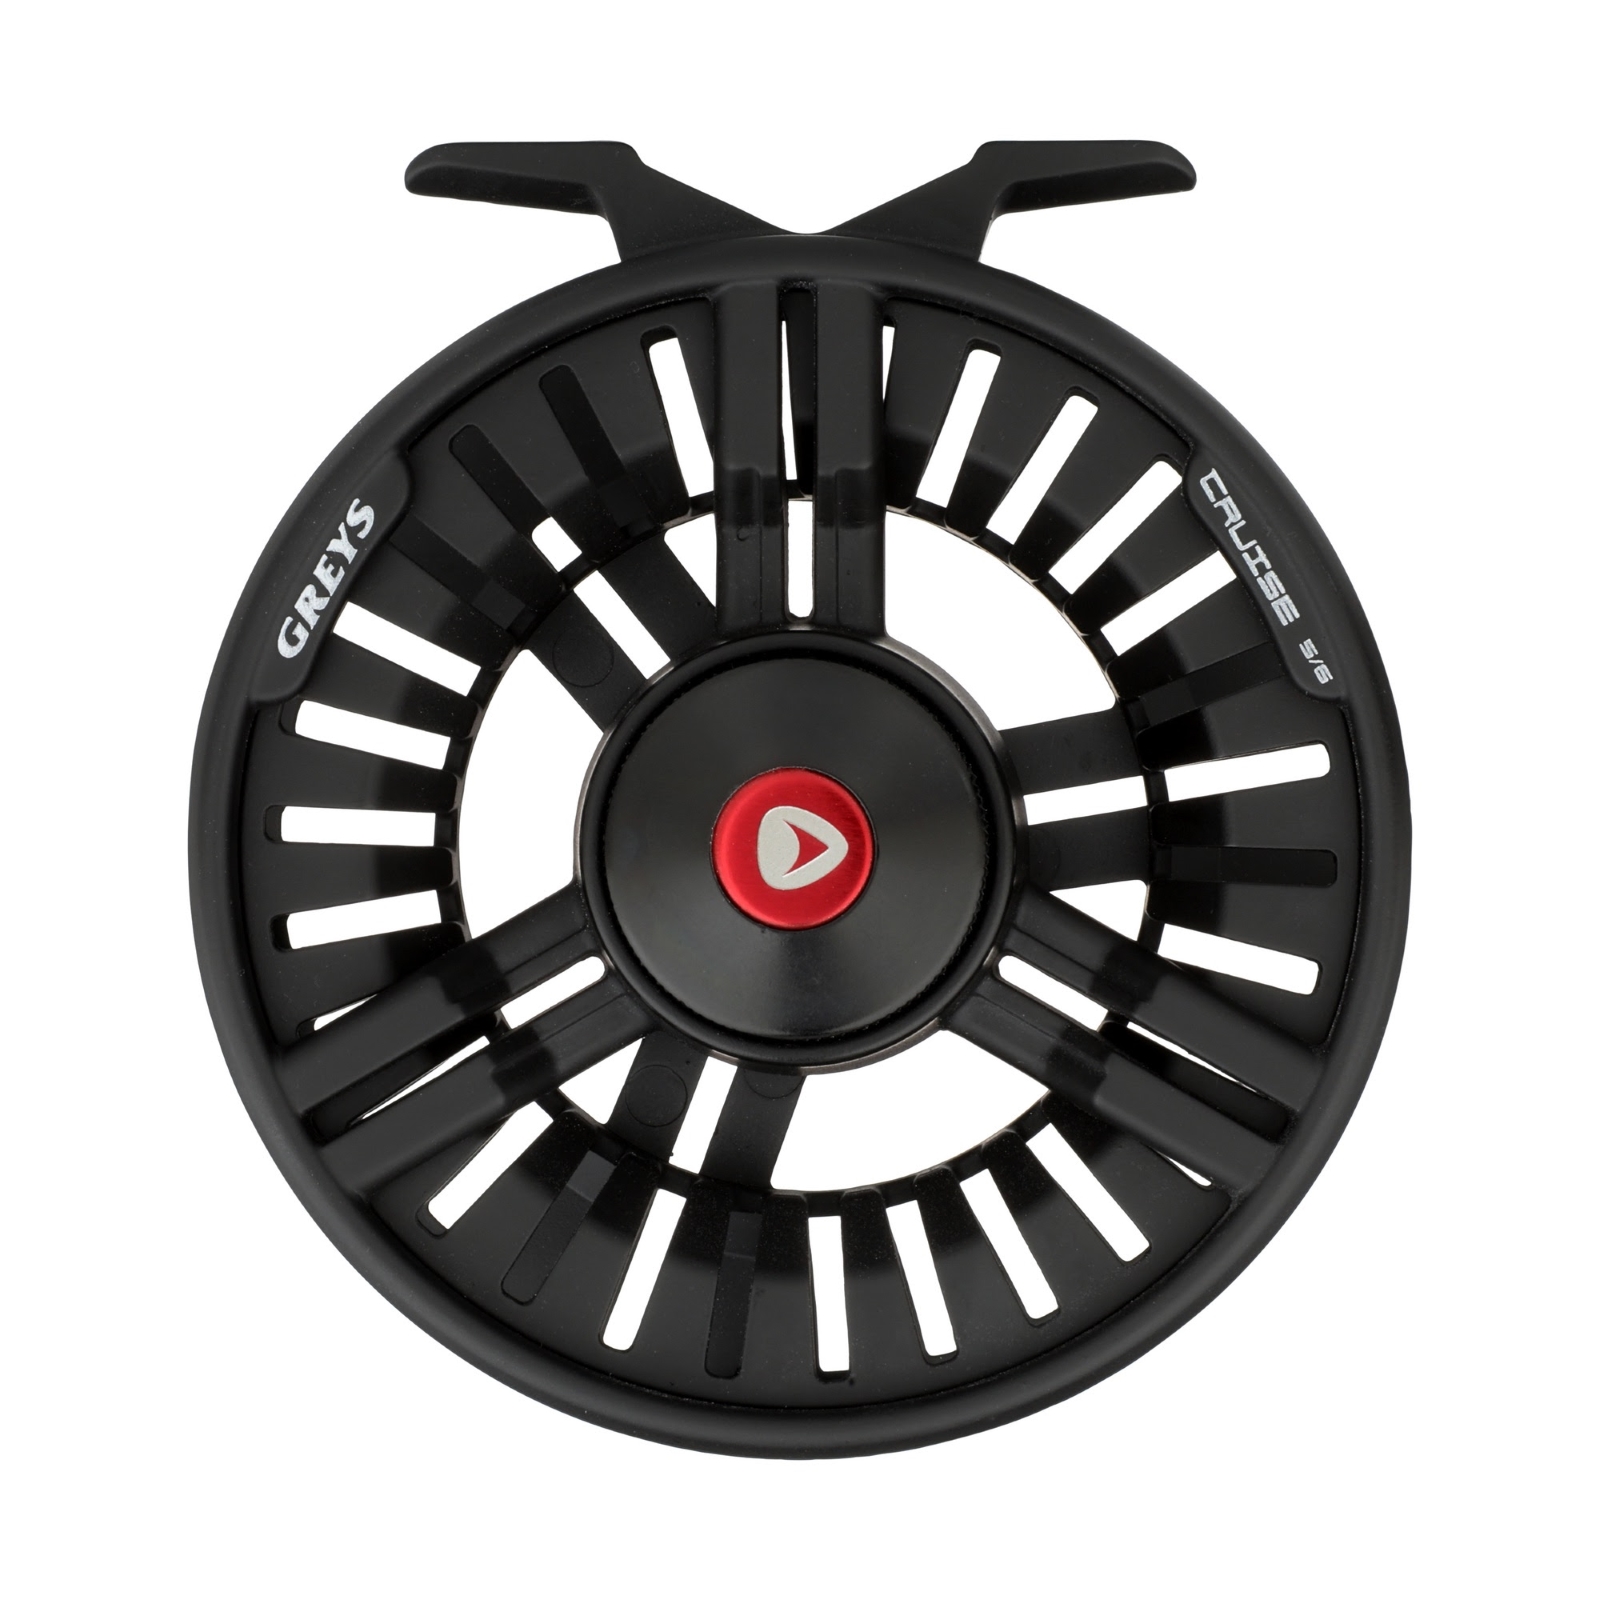 The NEW Cruise Fly Reel and Combo from Greys Fly Fishing